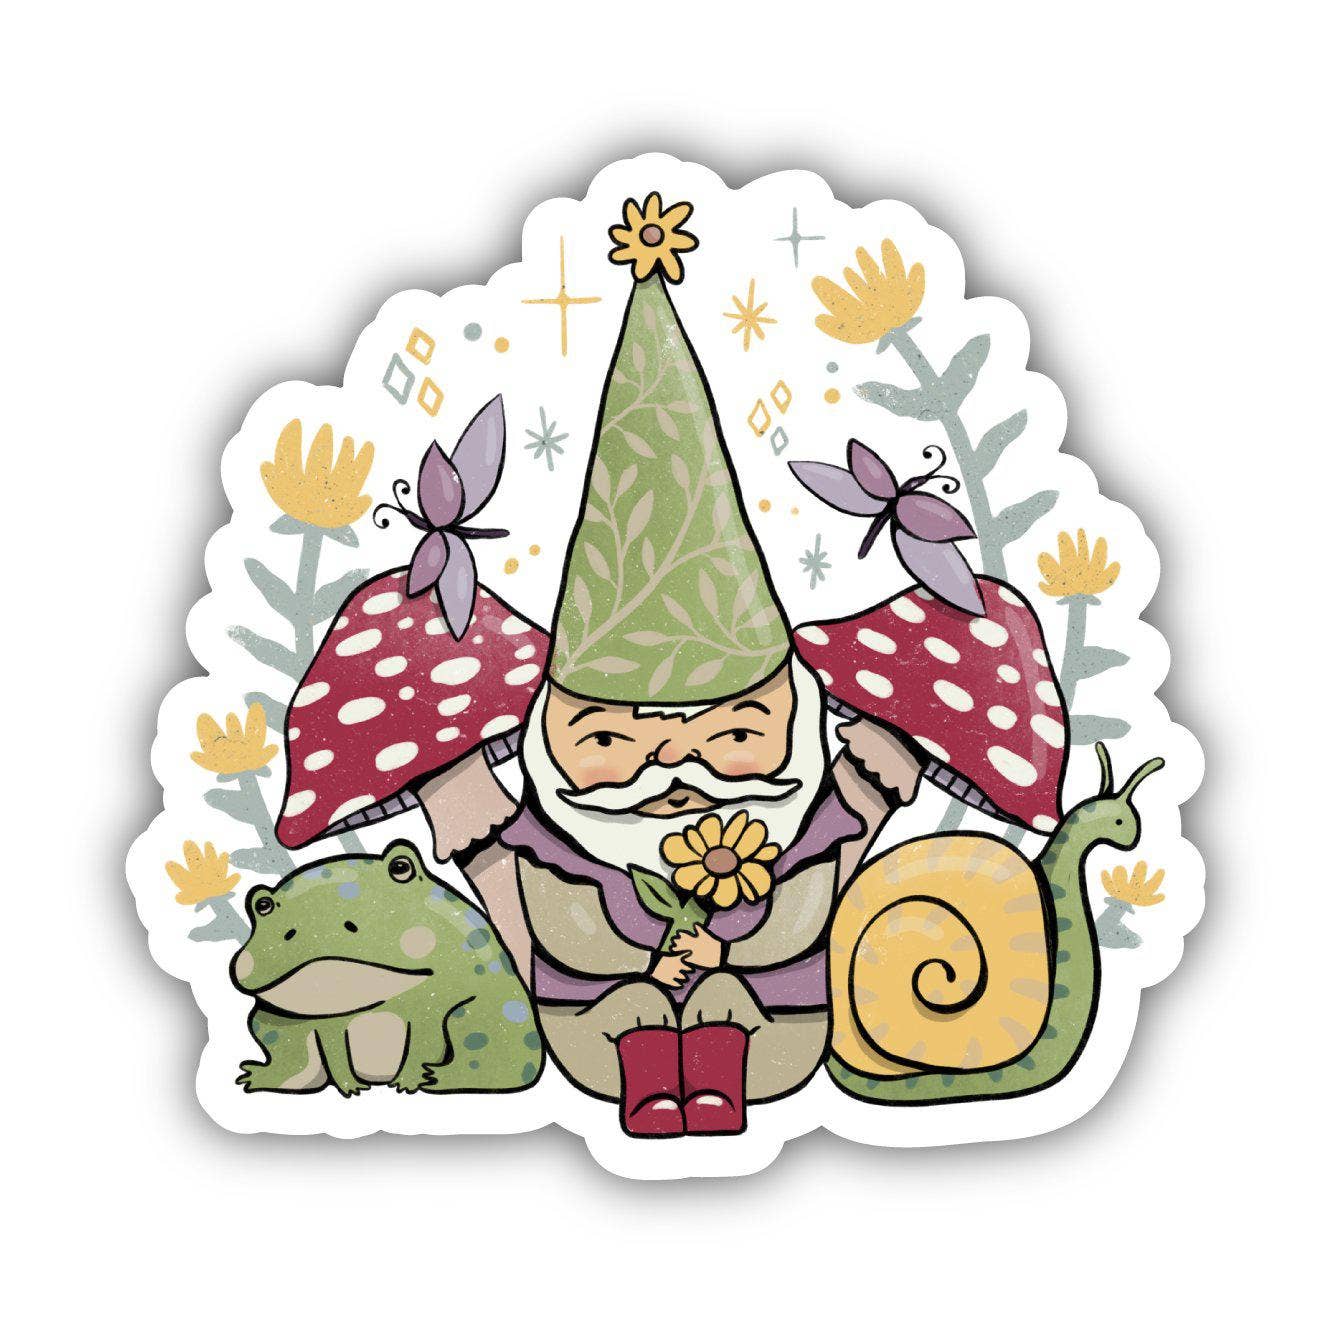 Green Elf and Frogs Fairytale Sticker - Sacred Crystals Stickers